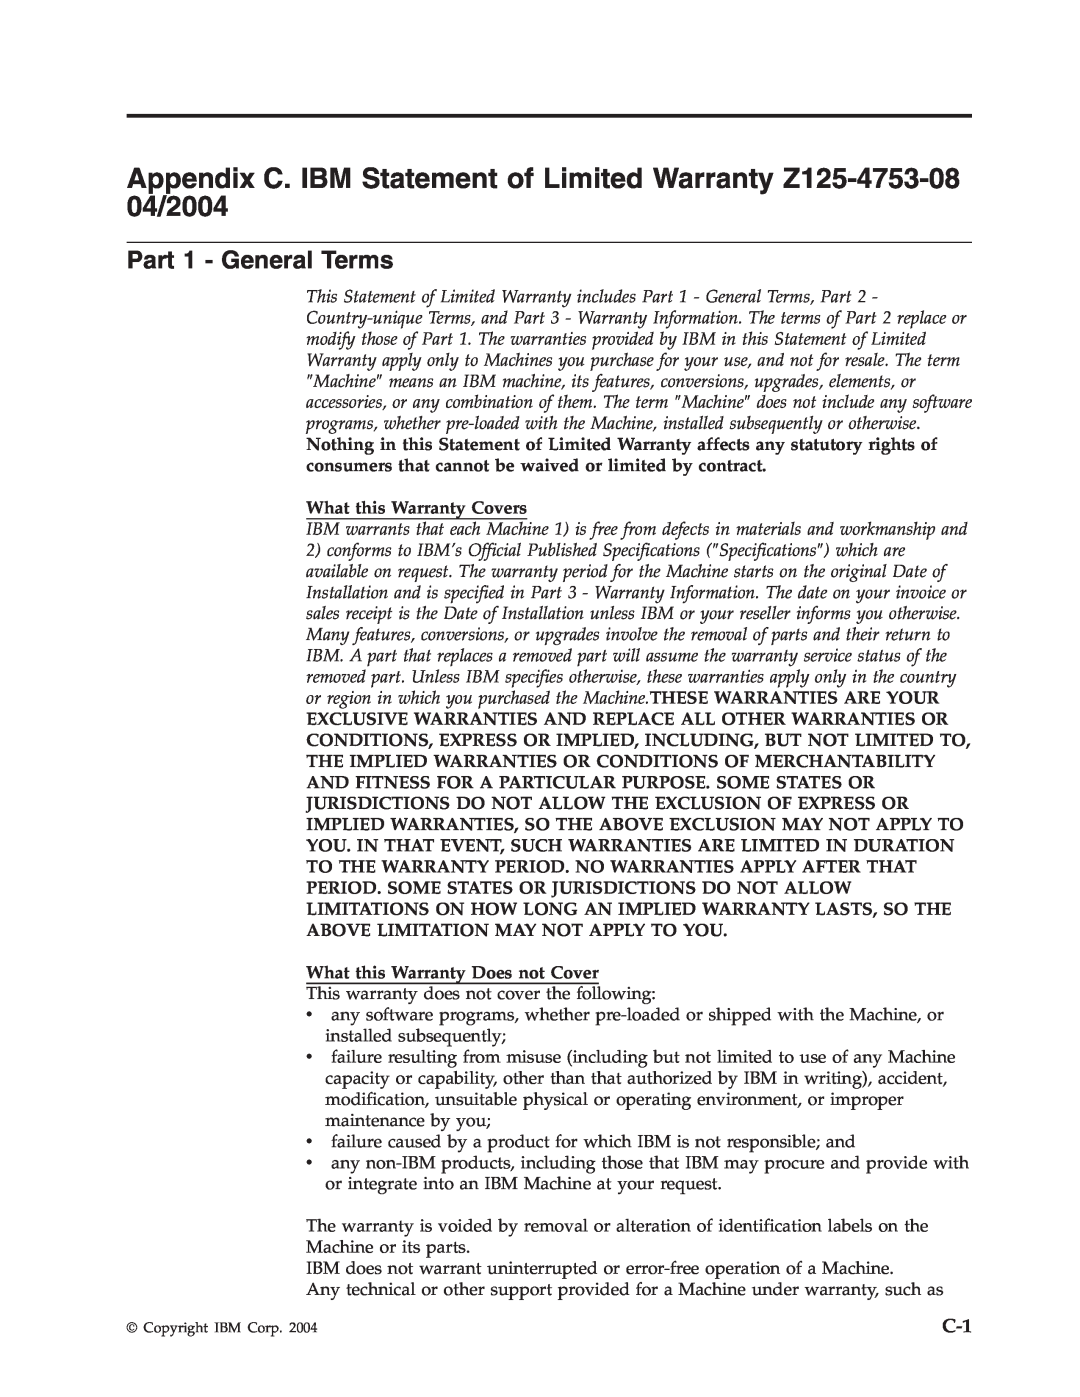 IBM 73P3315 manual Appendix C. IBM Statement of Limited Warranty Z125-4753-08 04/2004, Part 1 - General Terms 